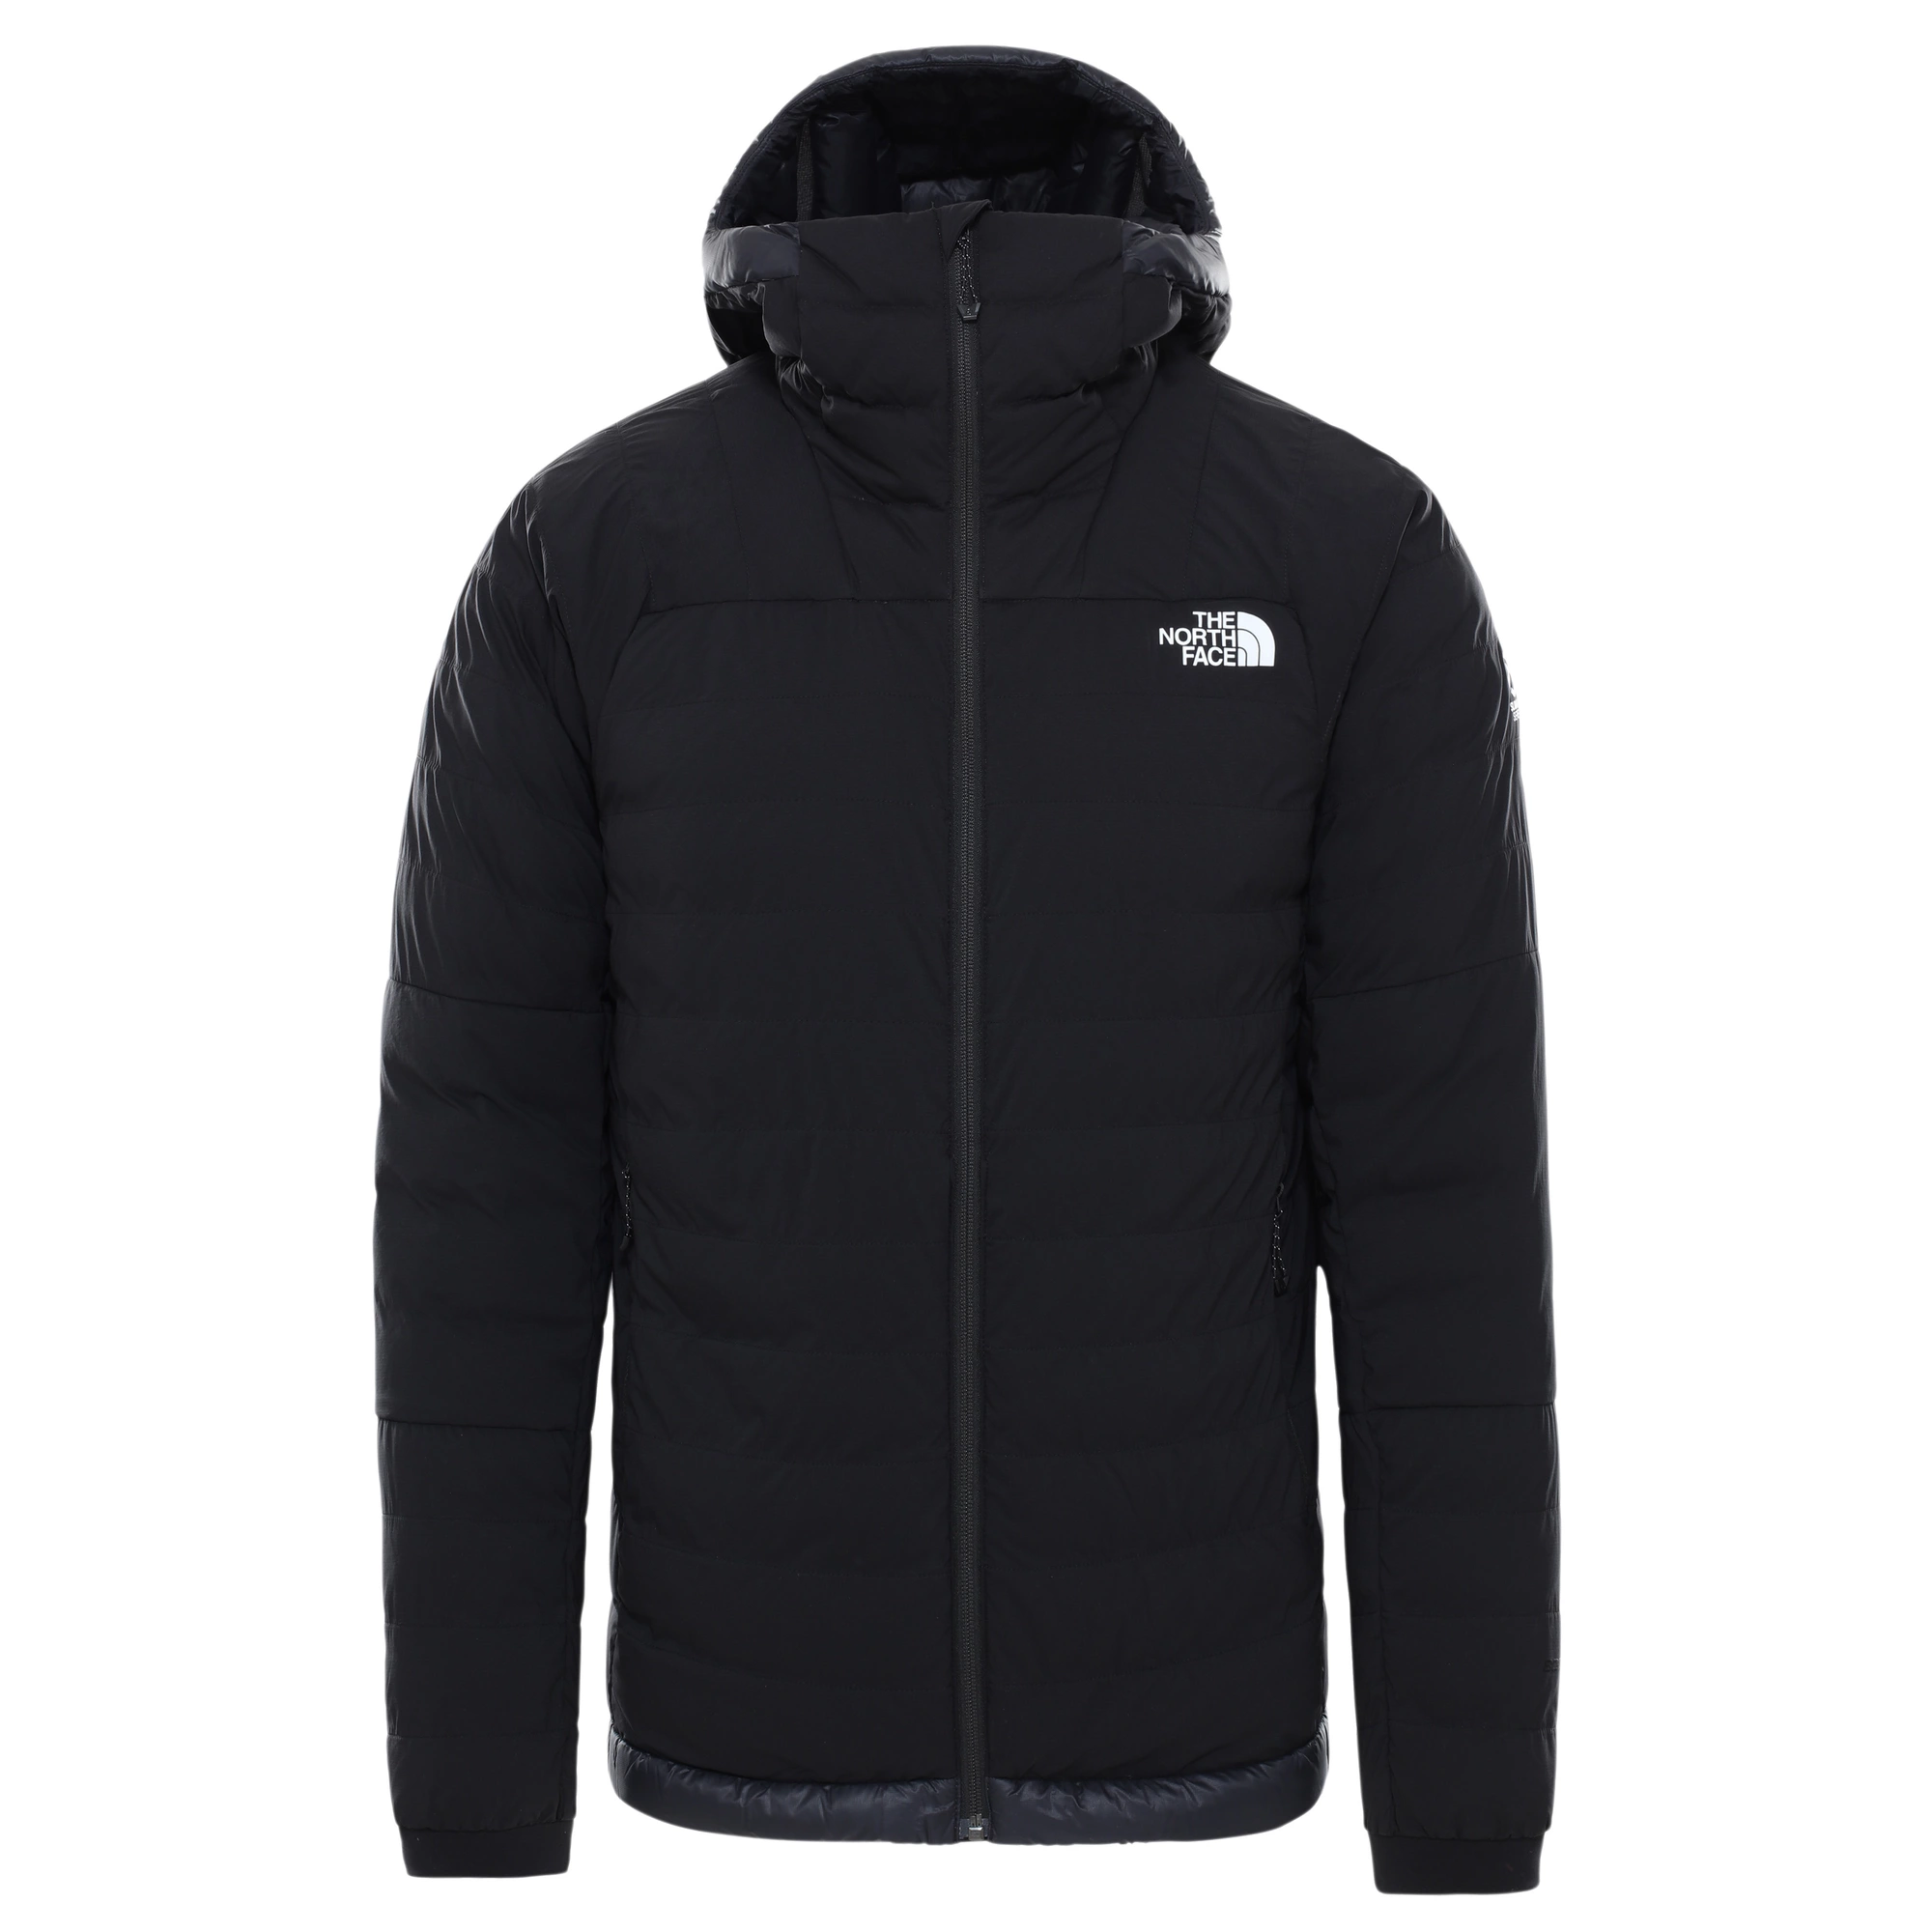 The North Face Summit Series L3 50/50